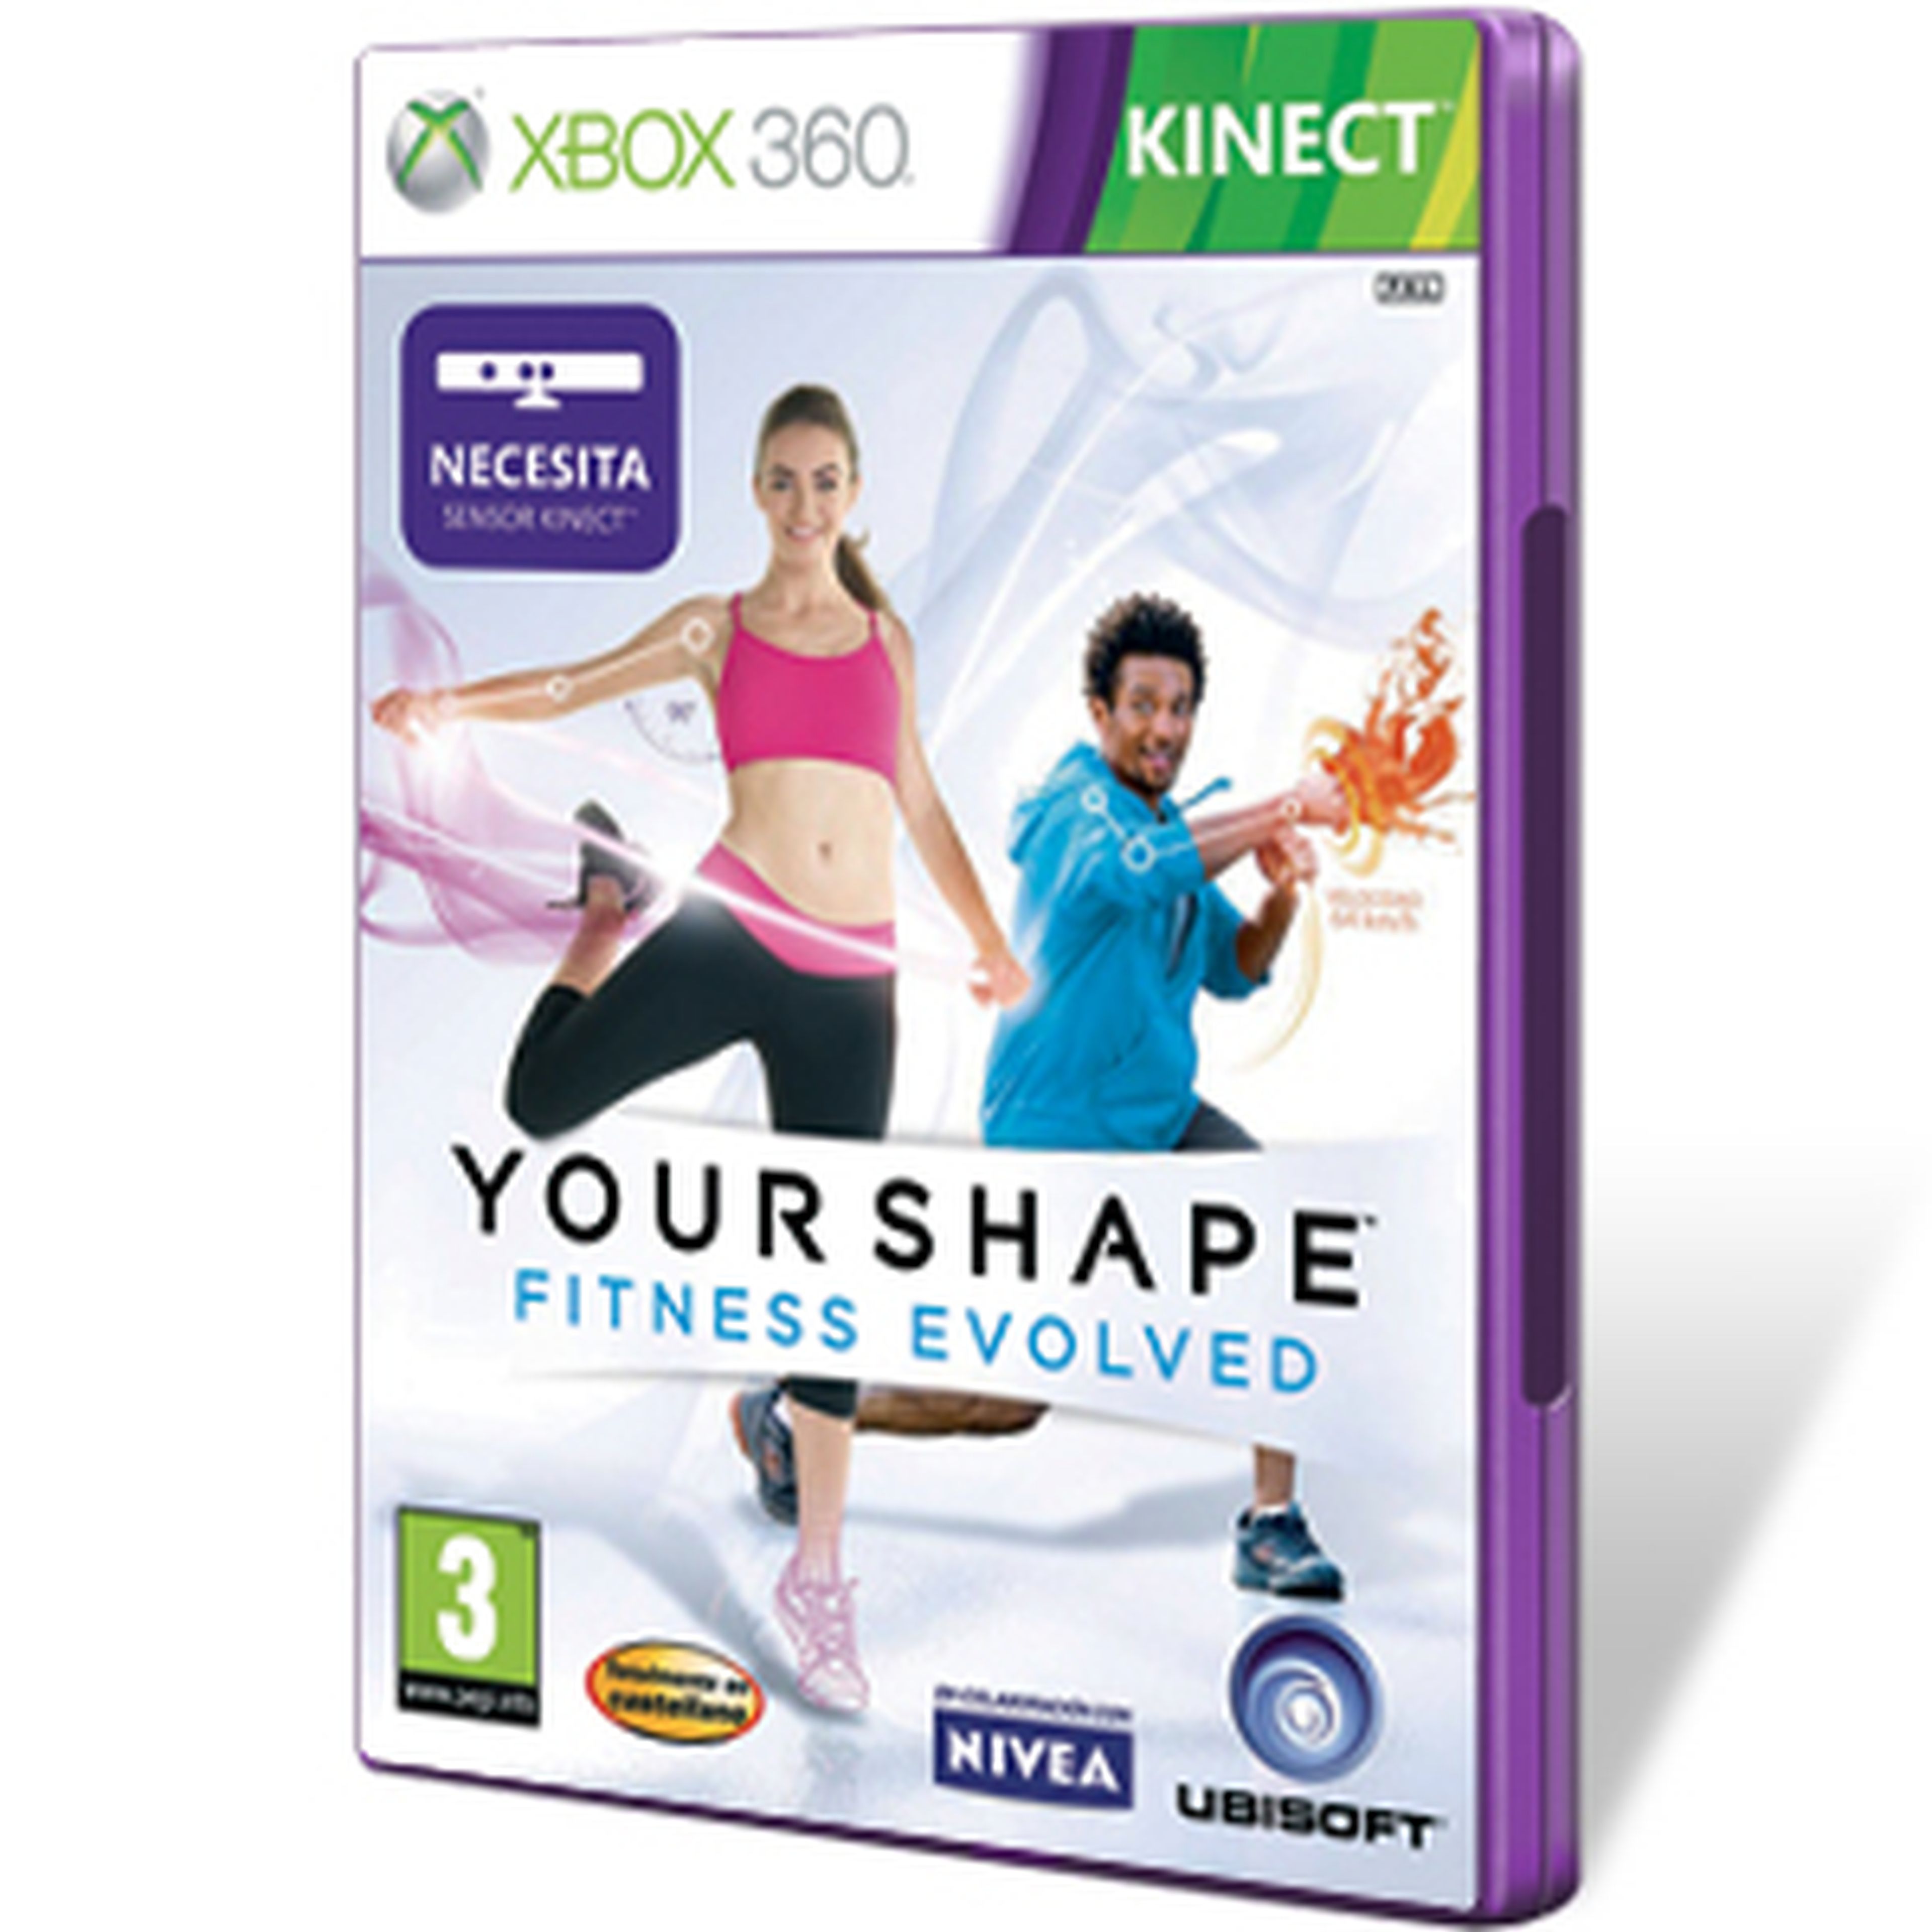 Your Shape Fitness Evolved para 360